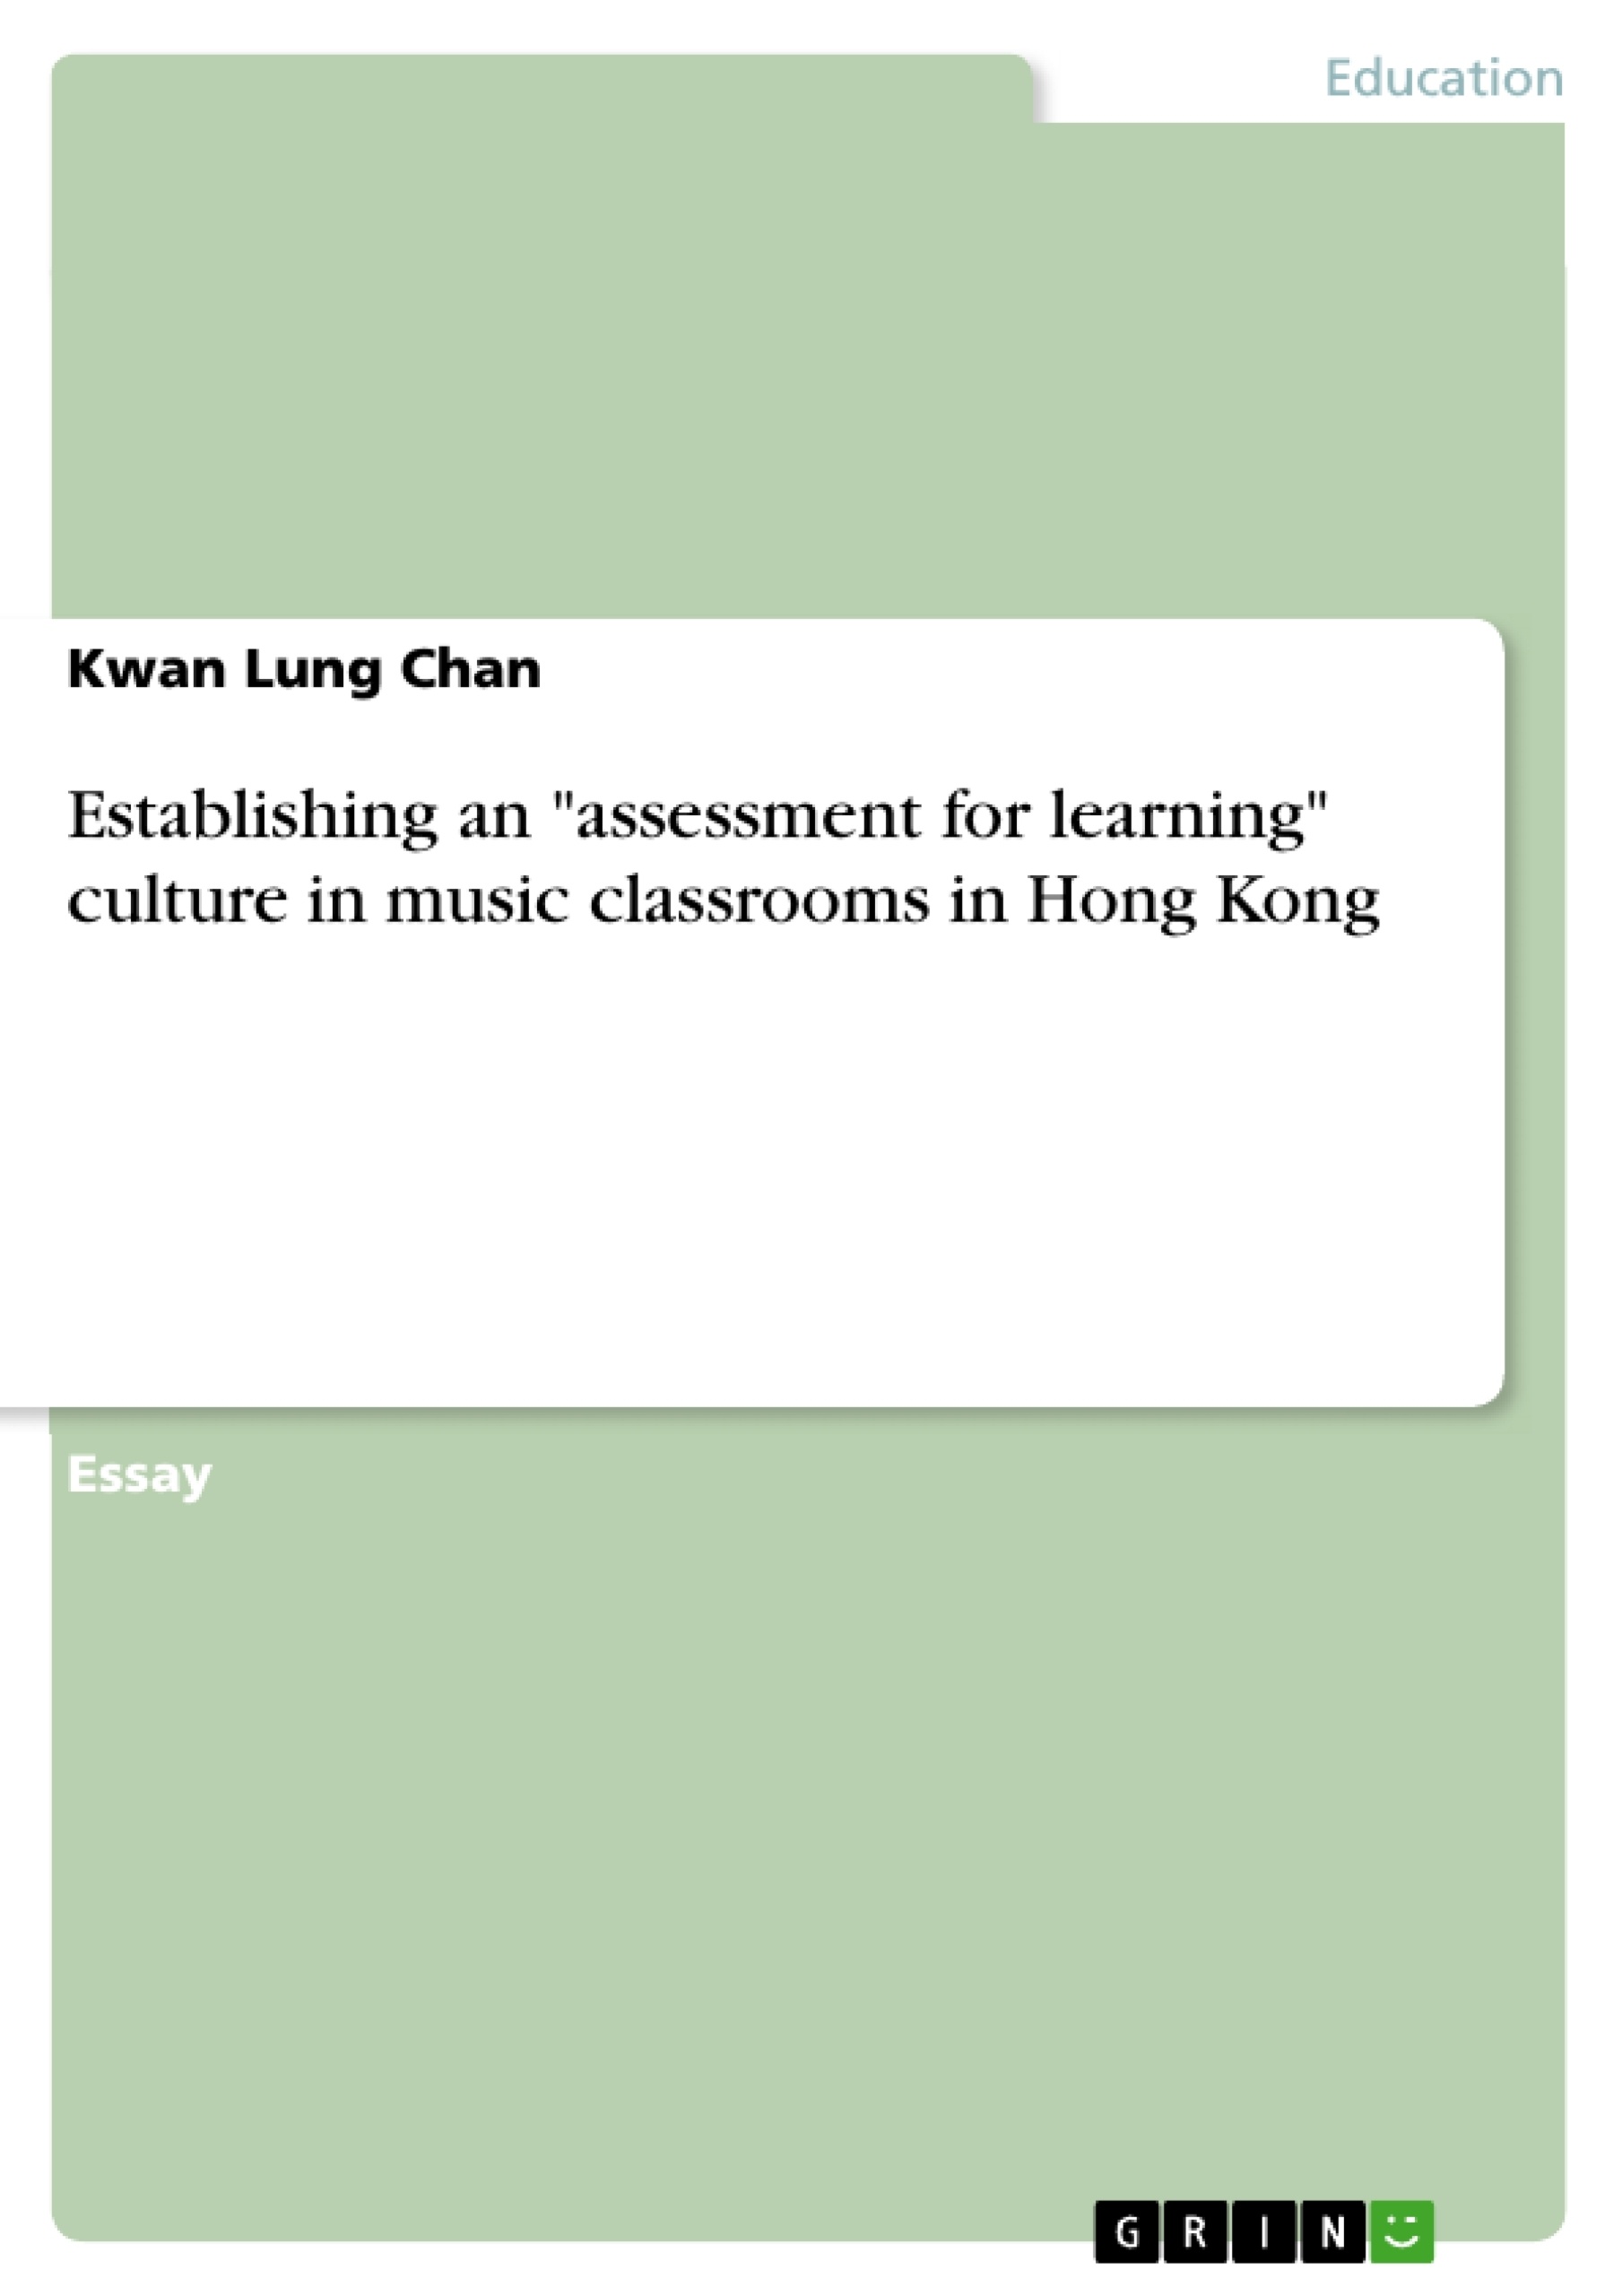 Titel: Establishing an "assessment for learning" culture in music classrooms in Hong Kong